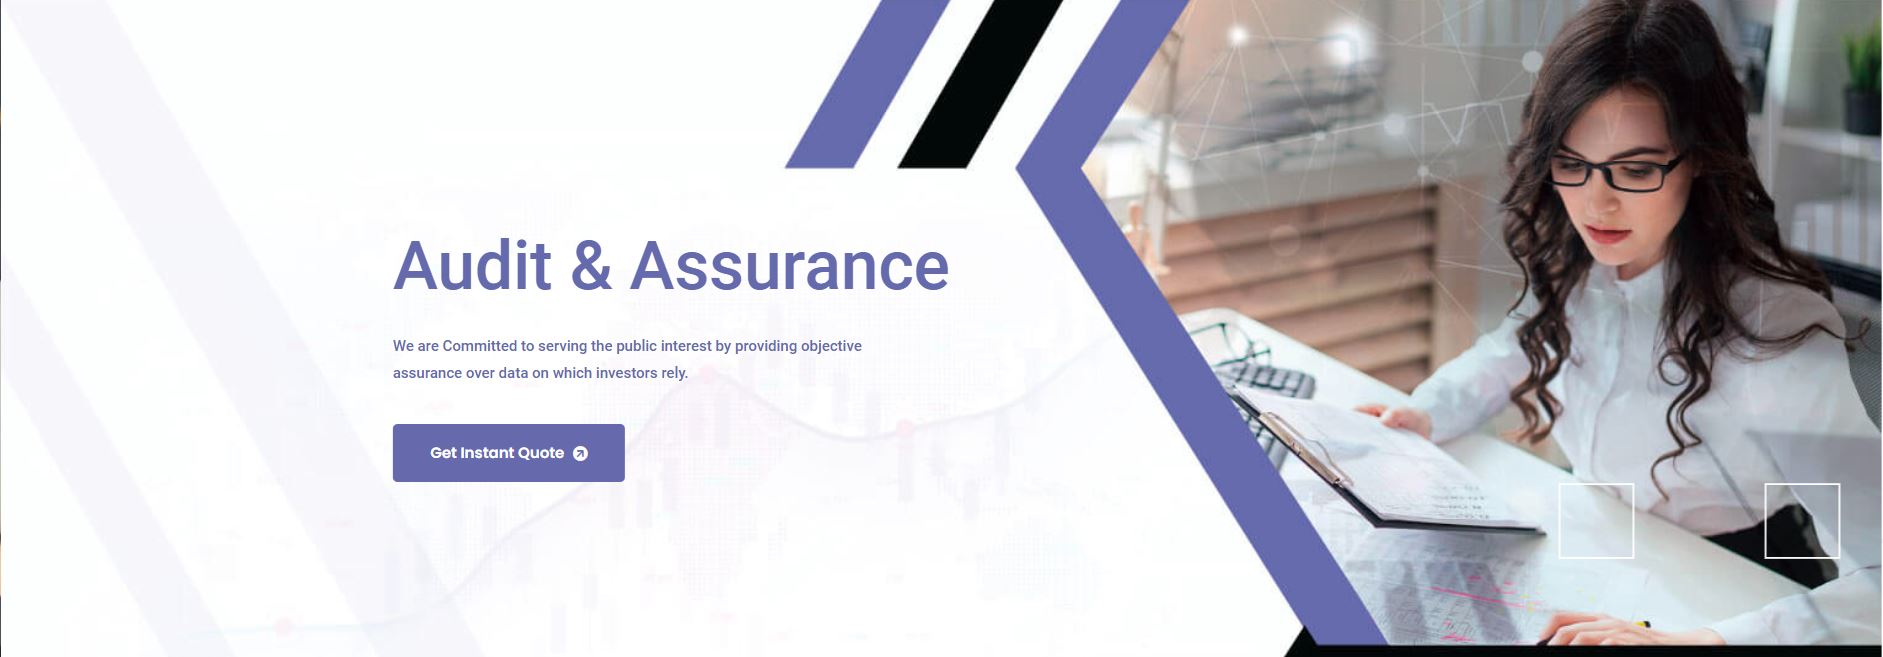 audit-and-assurance